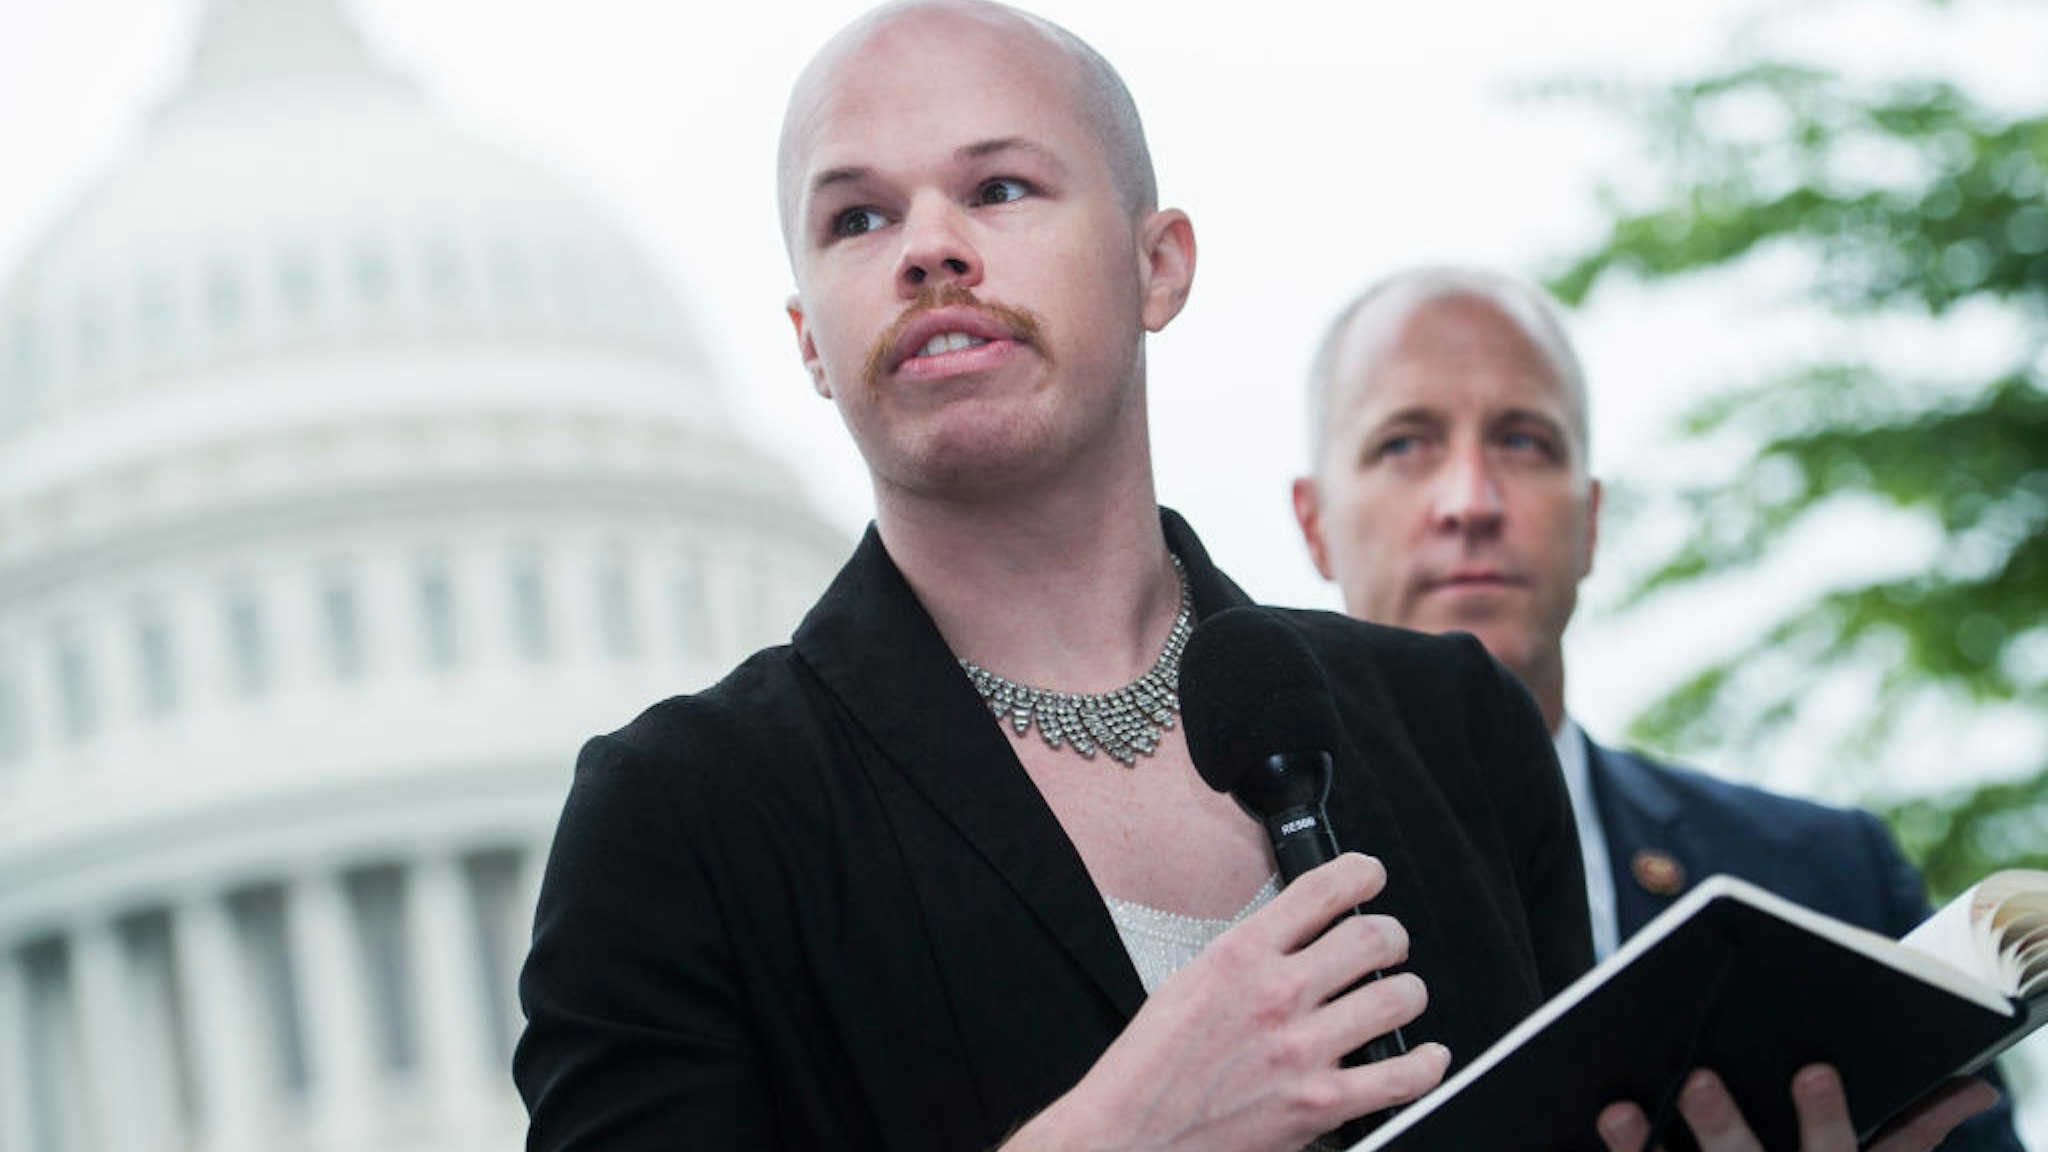 UNITED STATES - JUNE 13: Rep. Sean Patrick Maloney, D-N.Y., and Sam Brinton, of the Trevor Project, are seen during a news conference outside the Capitol on the "LGBTQ Essential Data Act," which would improve the collection of gender identity data in violent crimes on Thursday, June 13, 2019. (Photo By Tom Williams/CQ Roll Call)